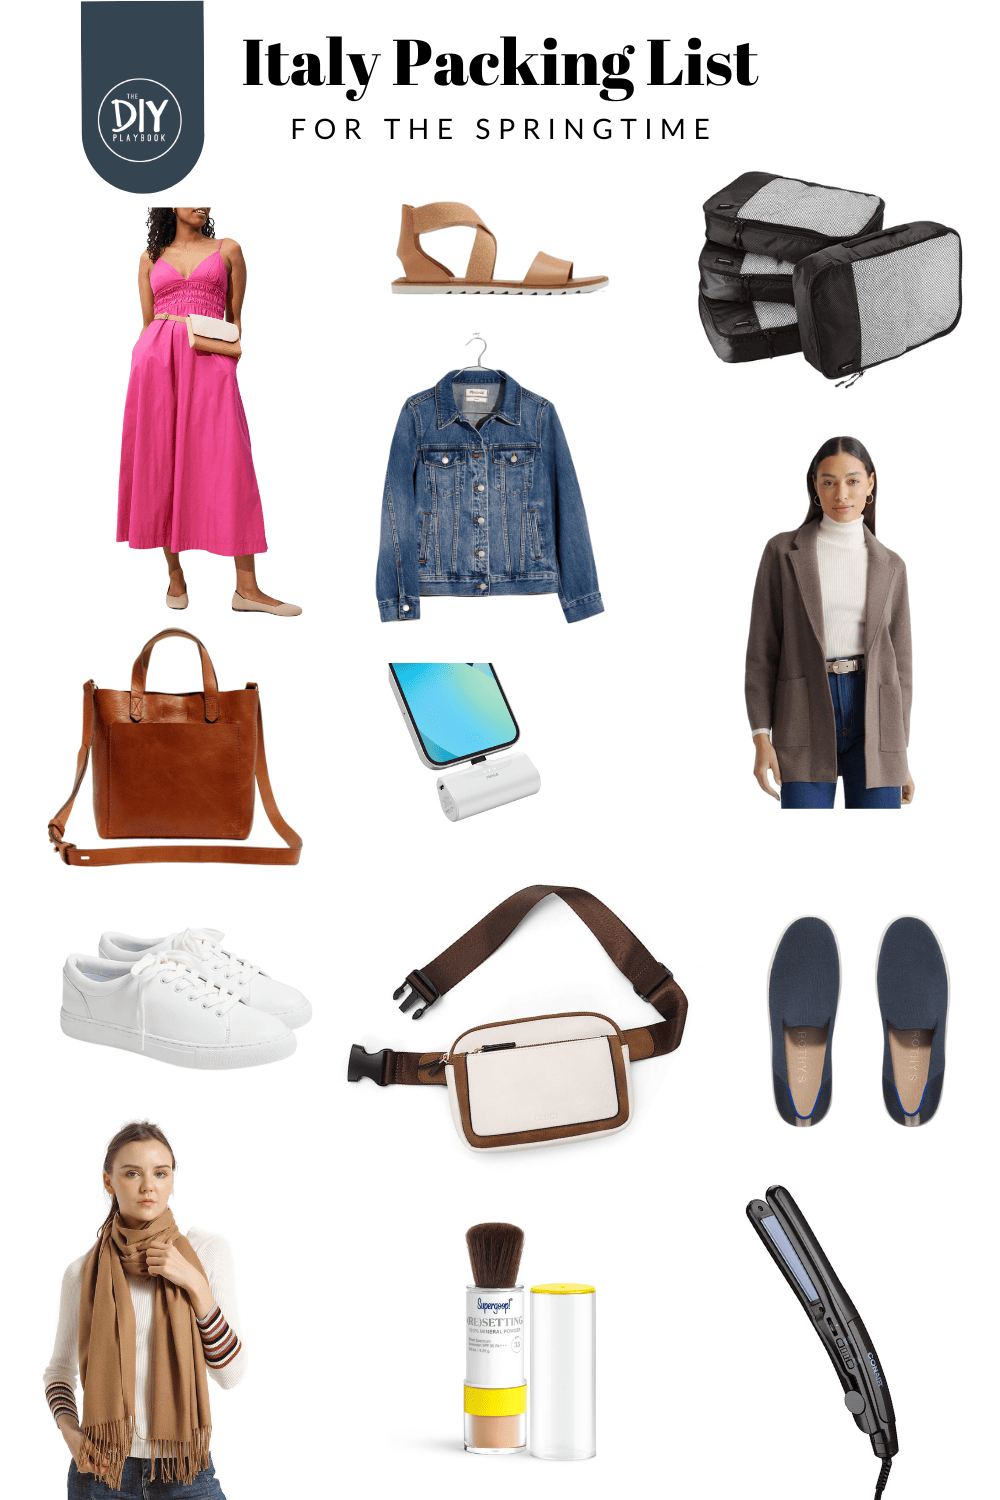 Our Spring Italy Packing List